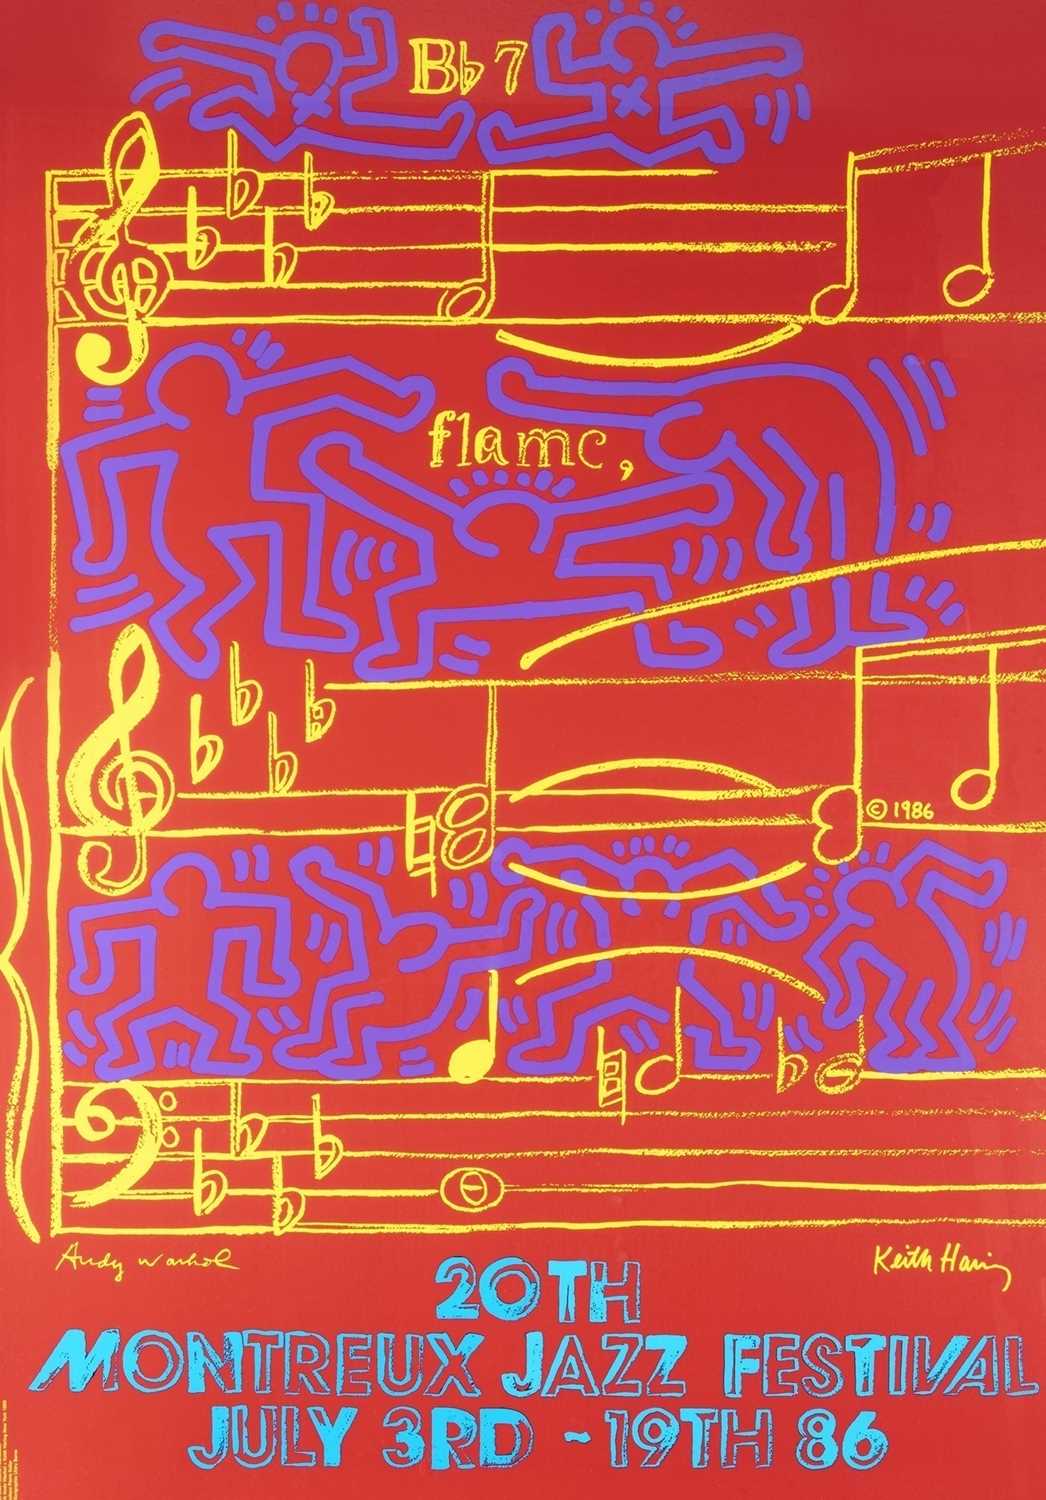 Lot 113 - Andy Warhol (American 1928-1987) & Keith Haring (American 1958-1990) (Collaboration), 'Montreux Jazz Festival', 1986